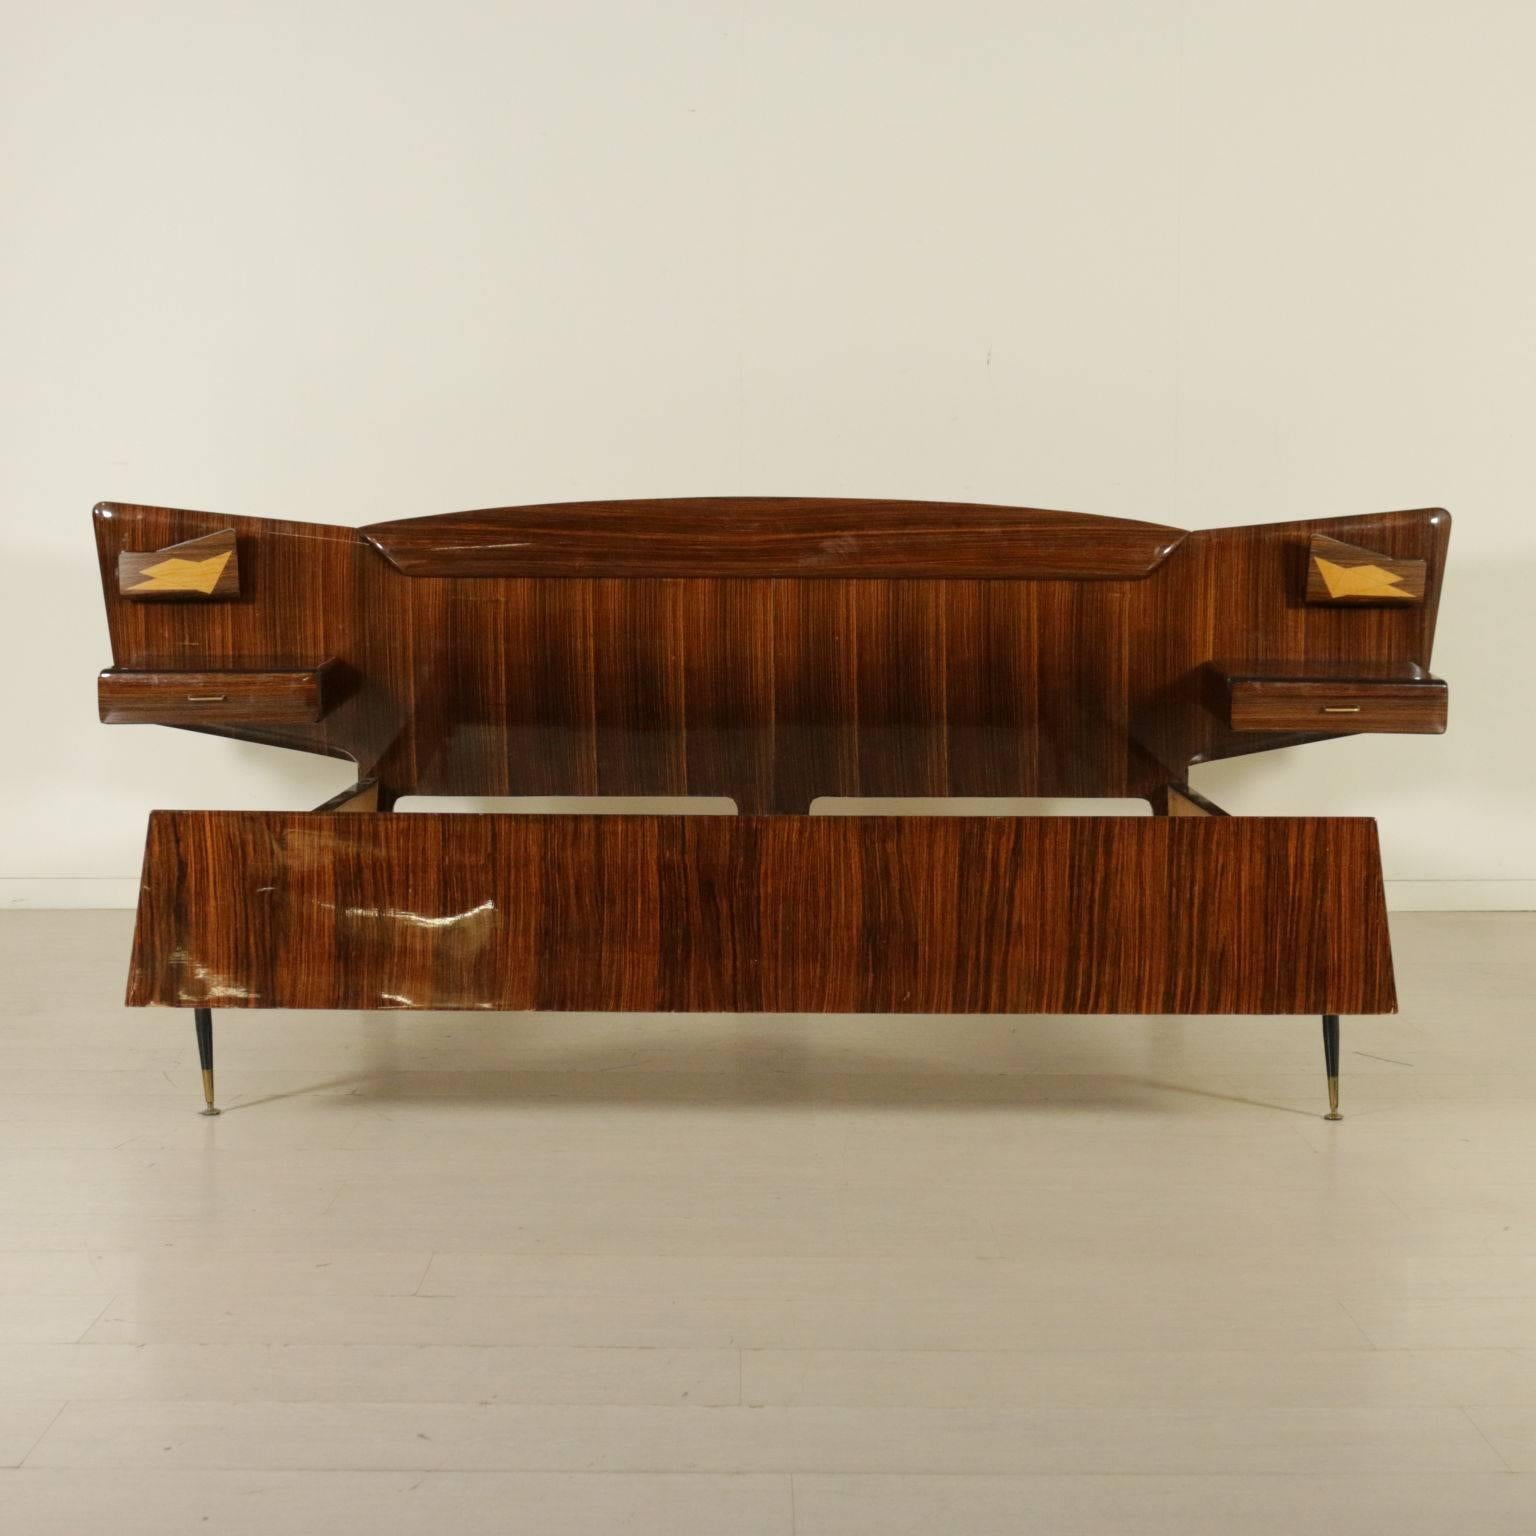 A double bed with hanging bedside tables, rosewood veneer. Manufactured in Italy, 1950s-1960s.